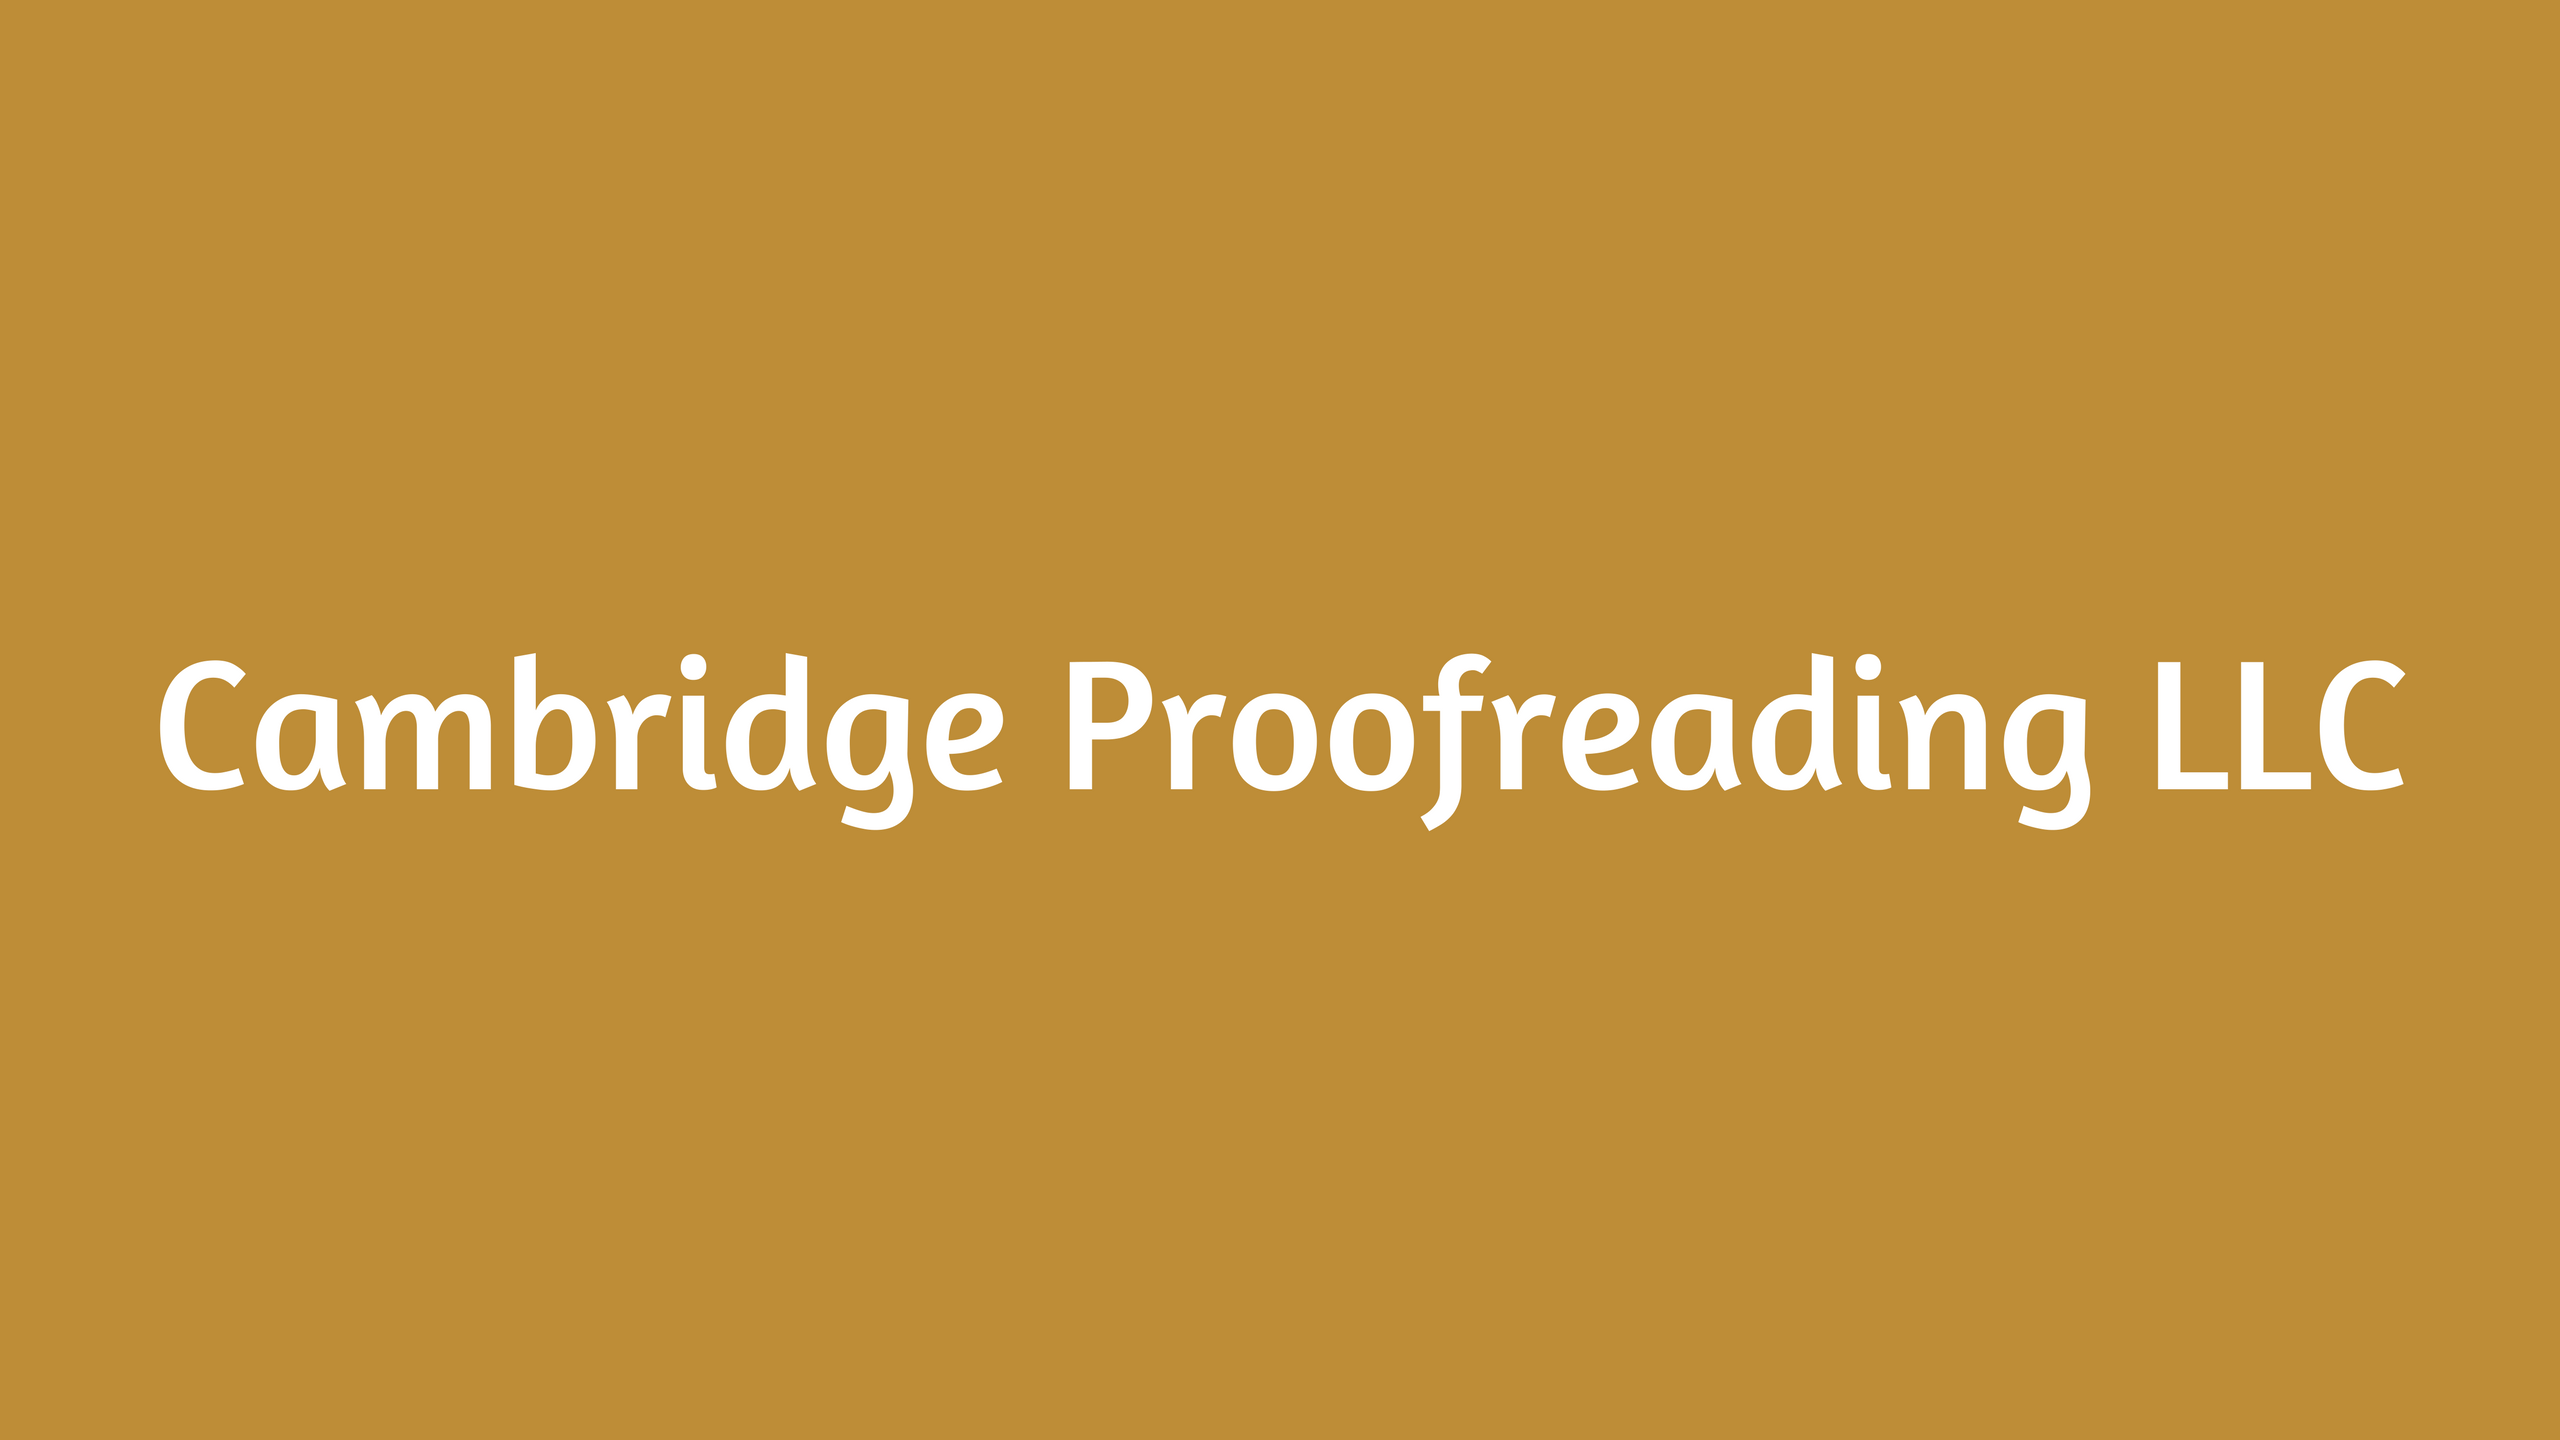 Online Proofreading Services Reviews-EdiThumbs